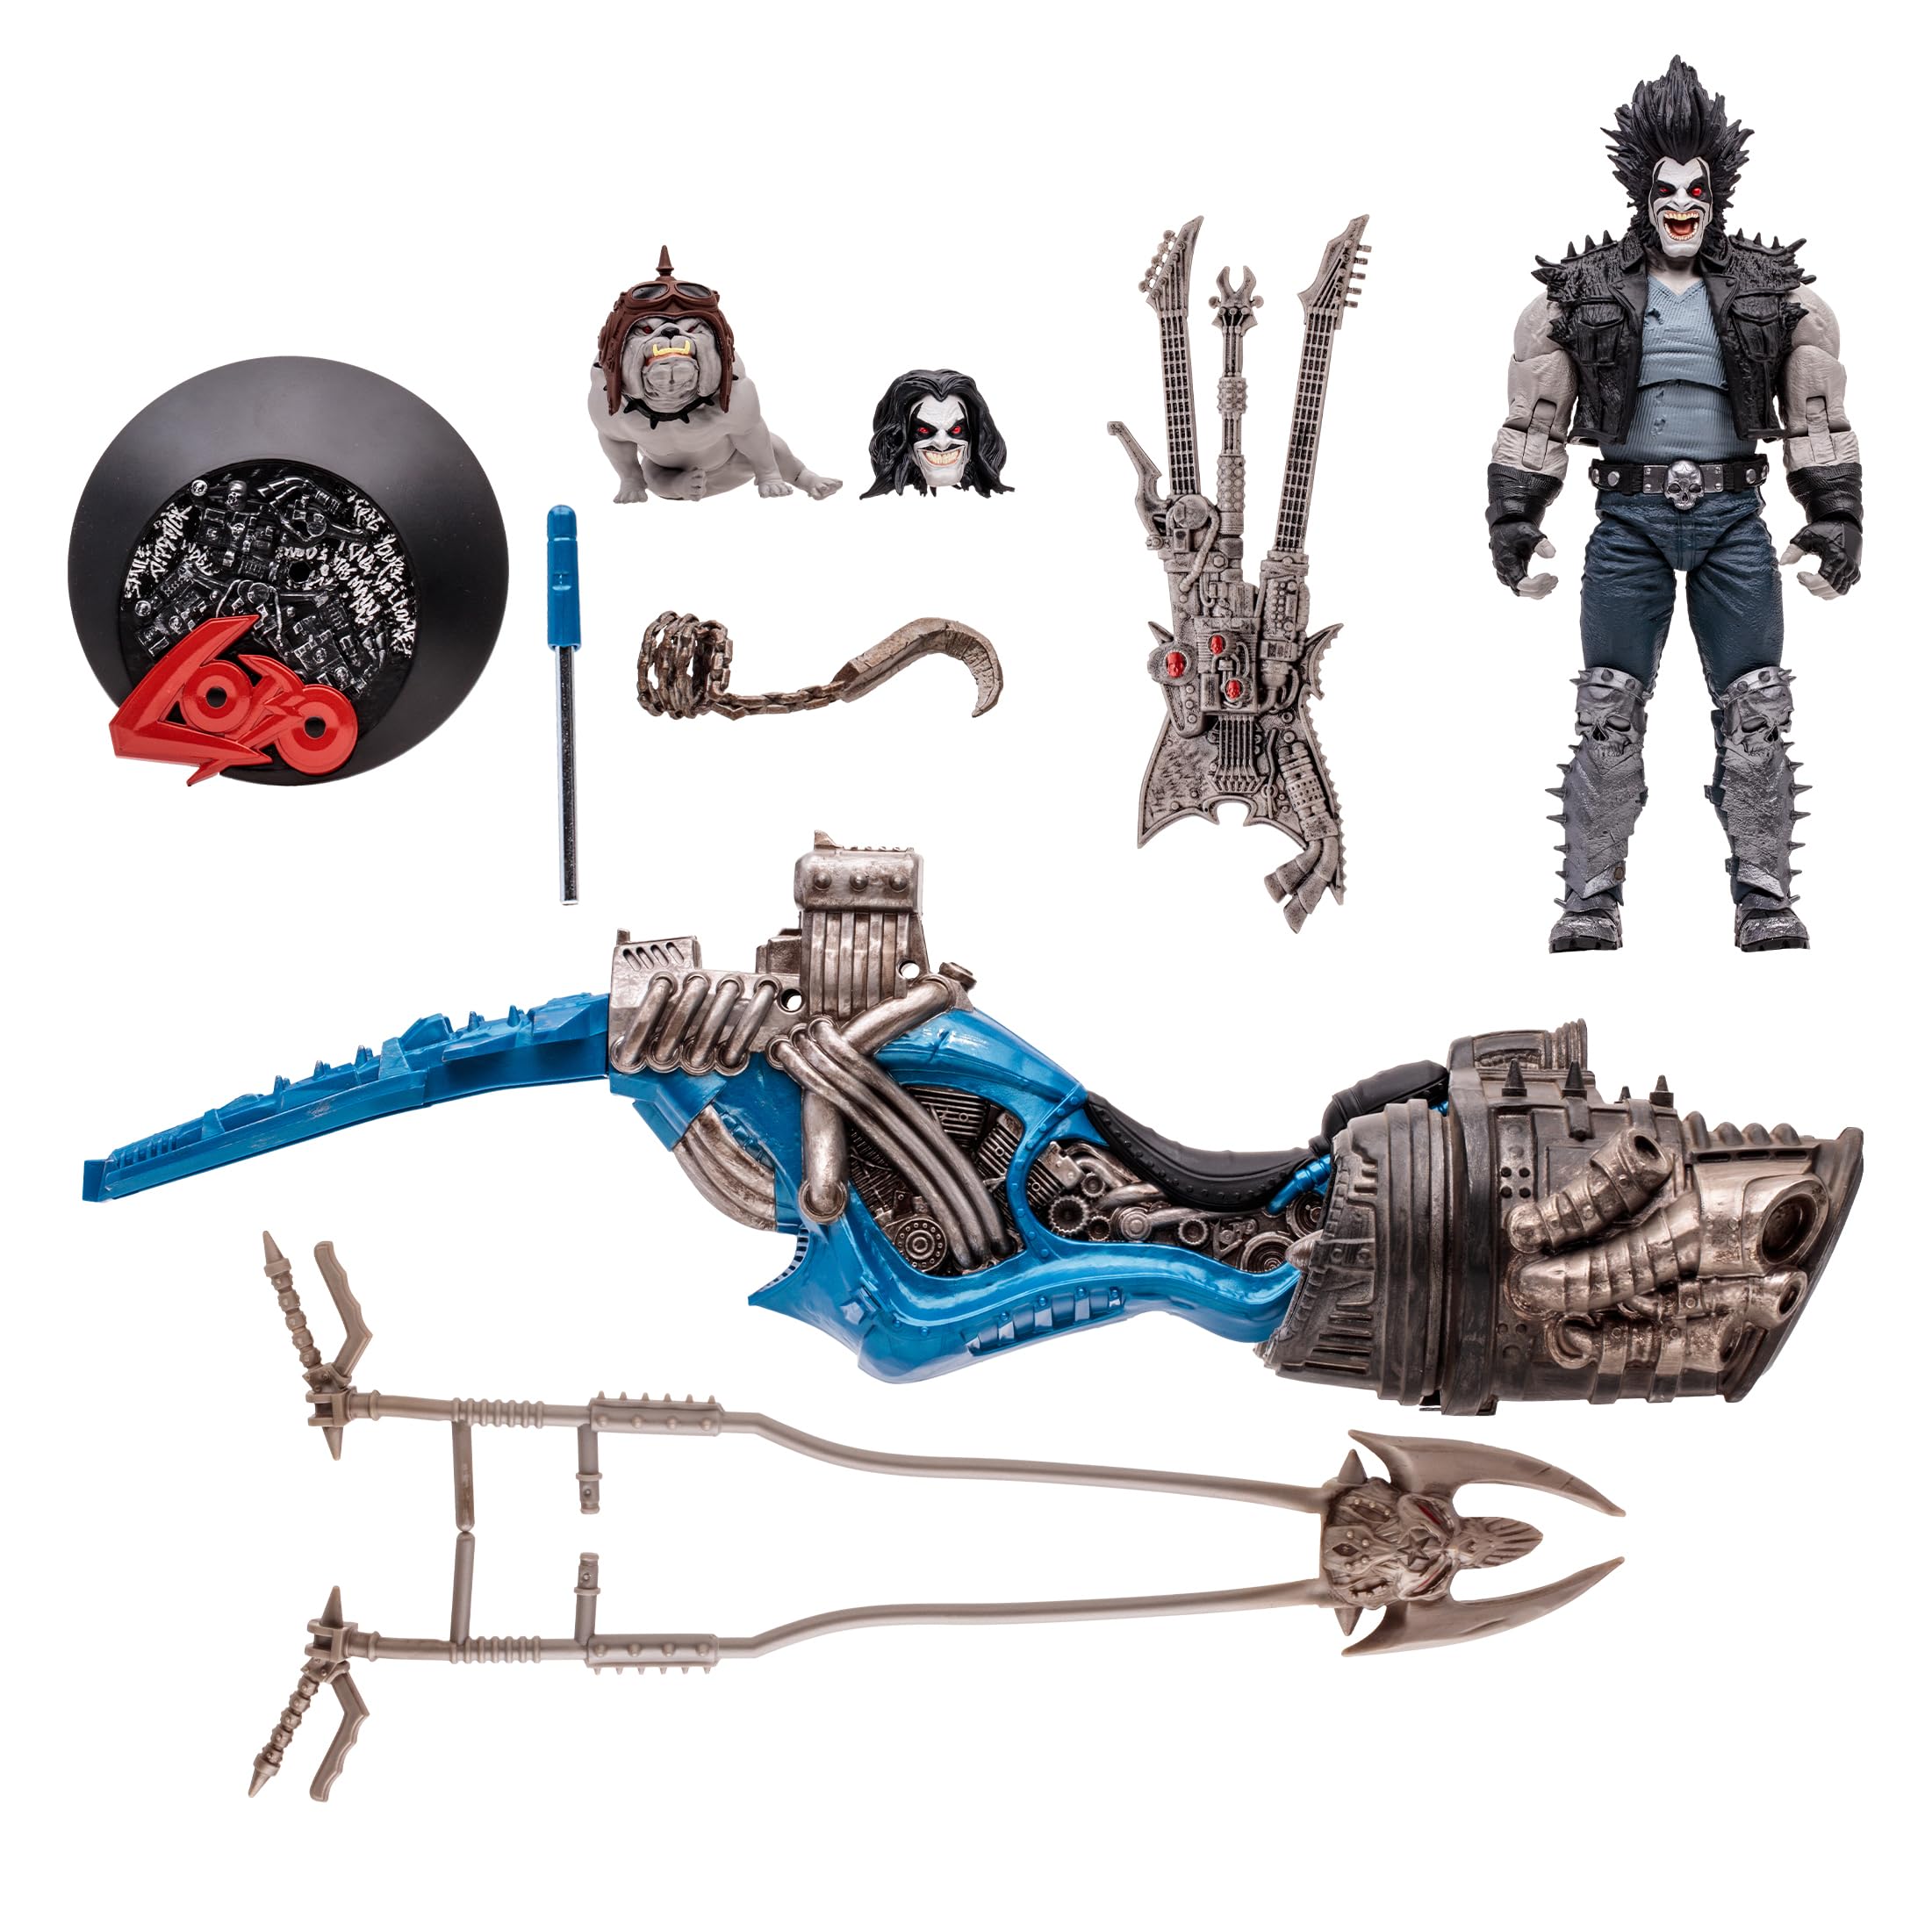 McFarlane Toys - DC Multiverse Lobo & Spacehog (Justice League of America) - 7in Scale Action Figure with Vehicle, Gold Label, Amazon Exclusive